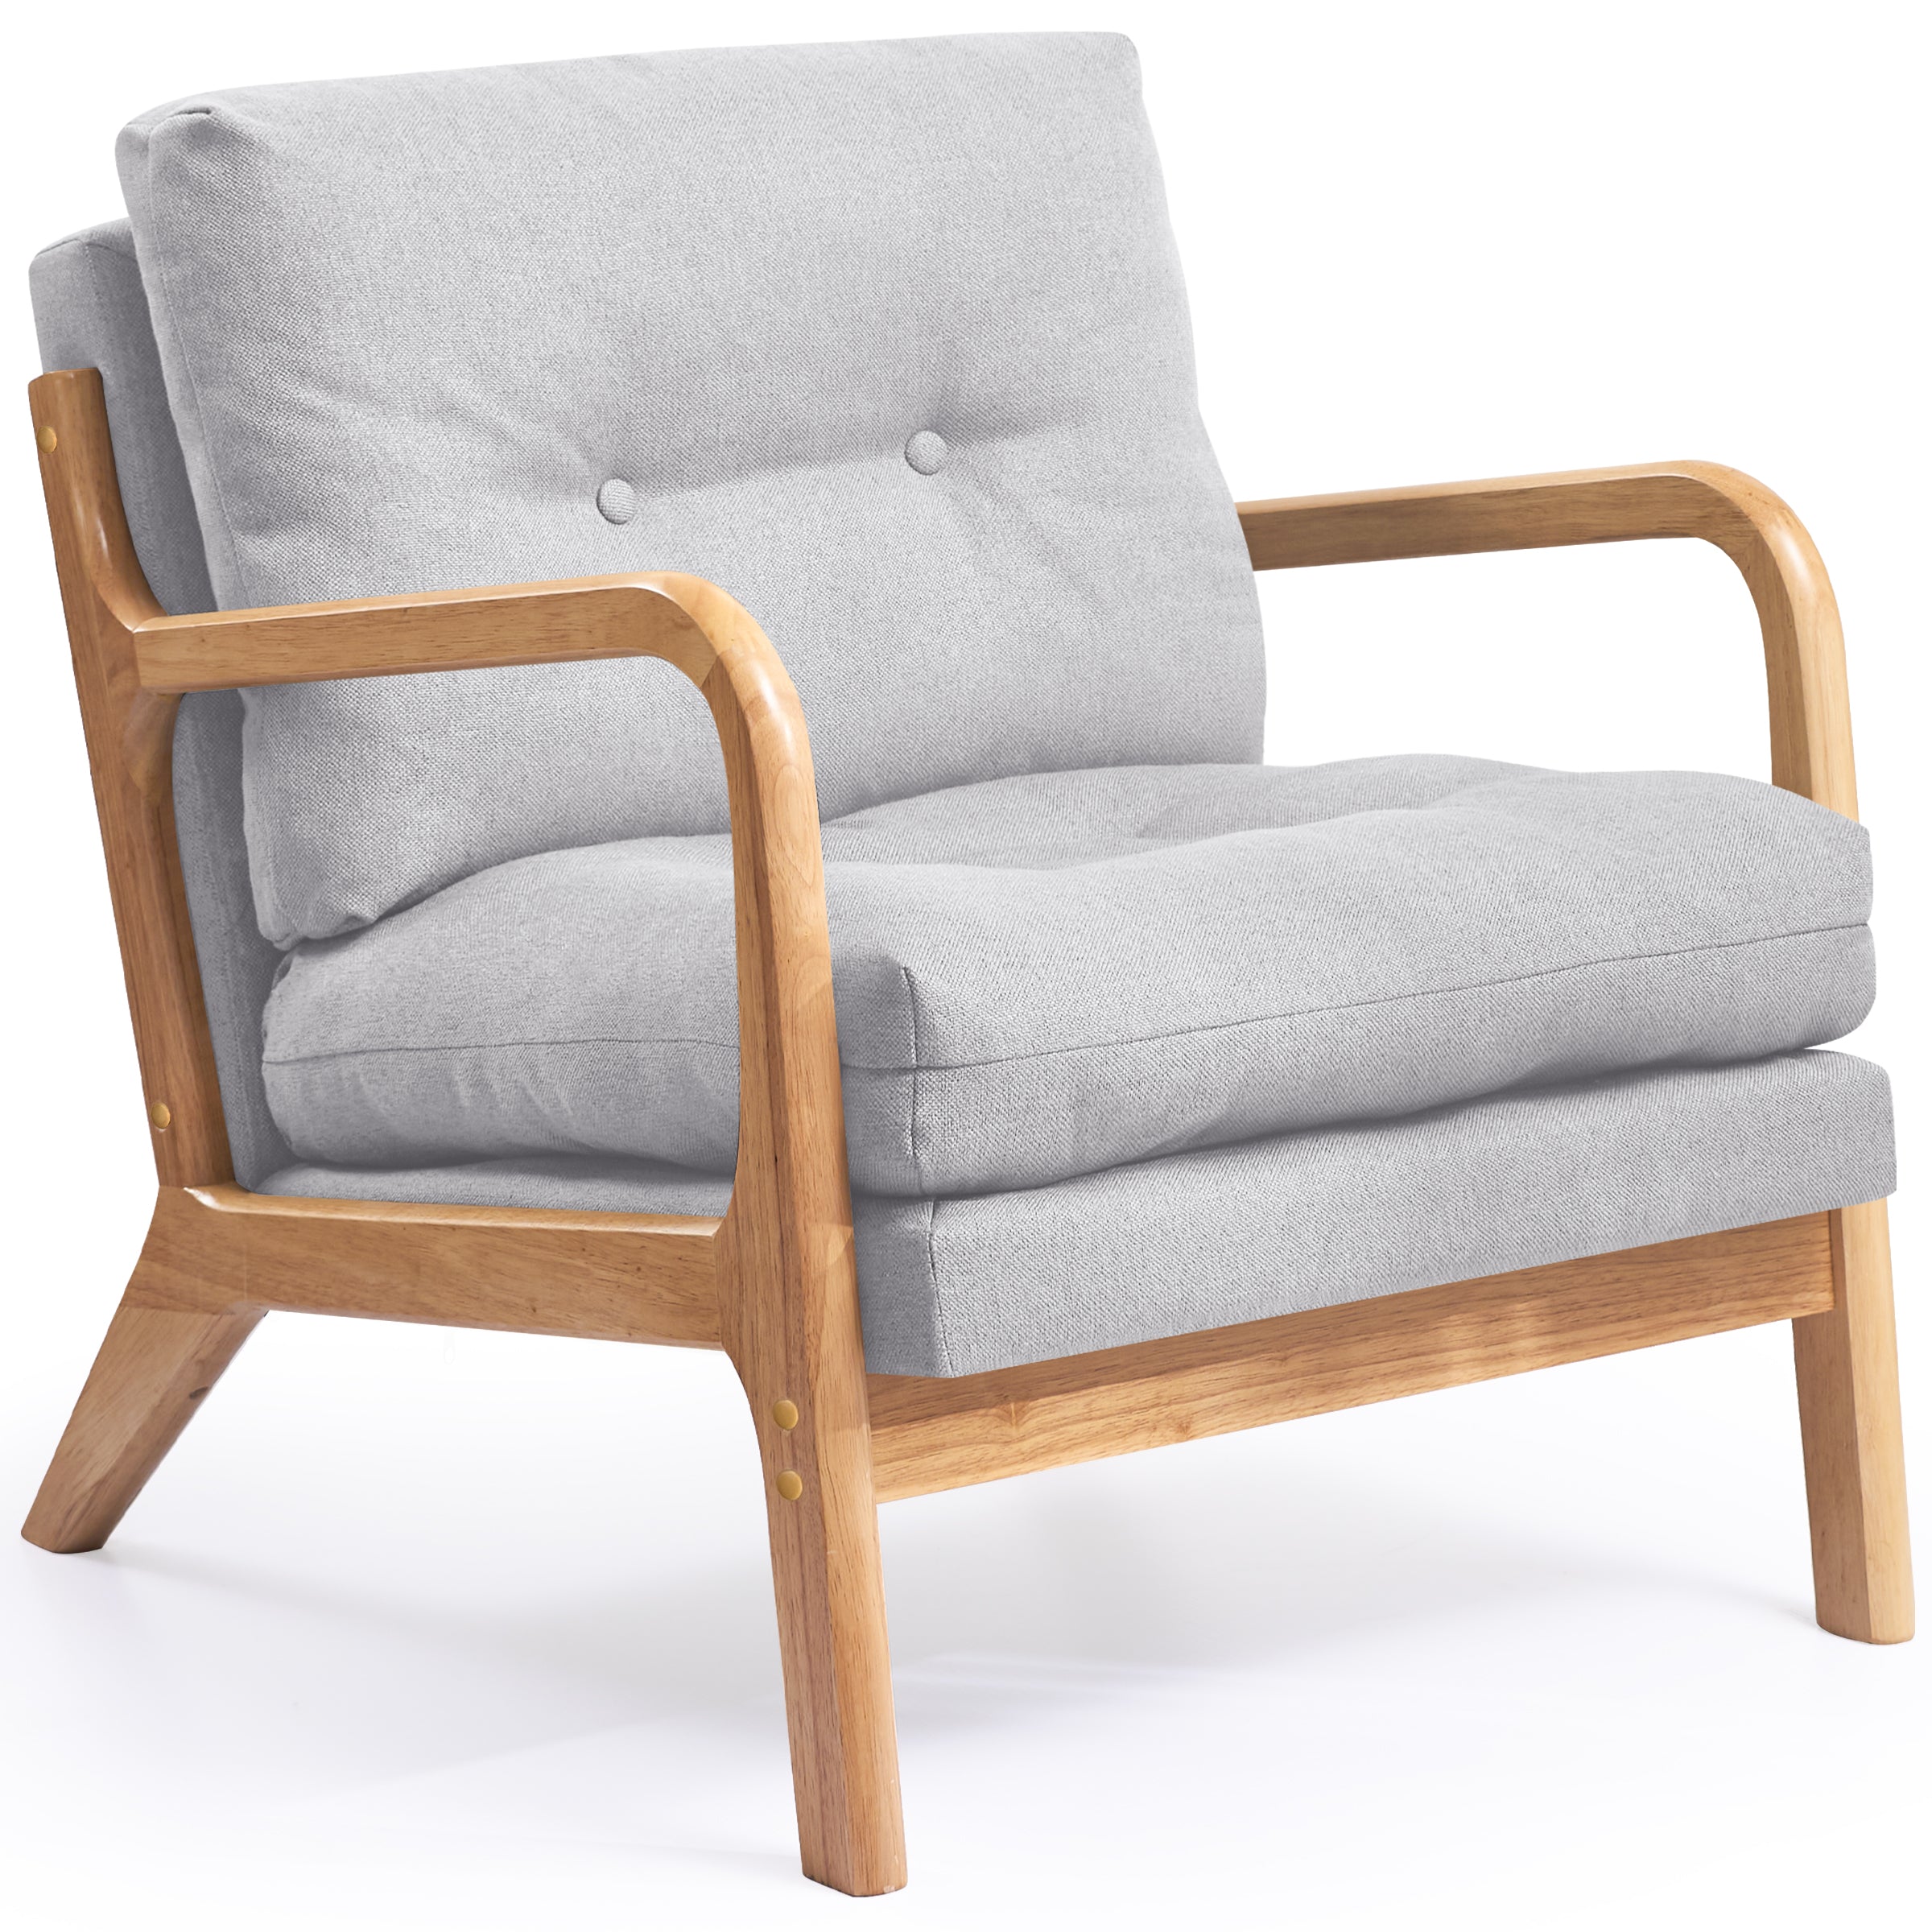 Cloud Comfort Cushion with Wooden Armrest Accent Chair